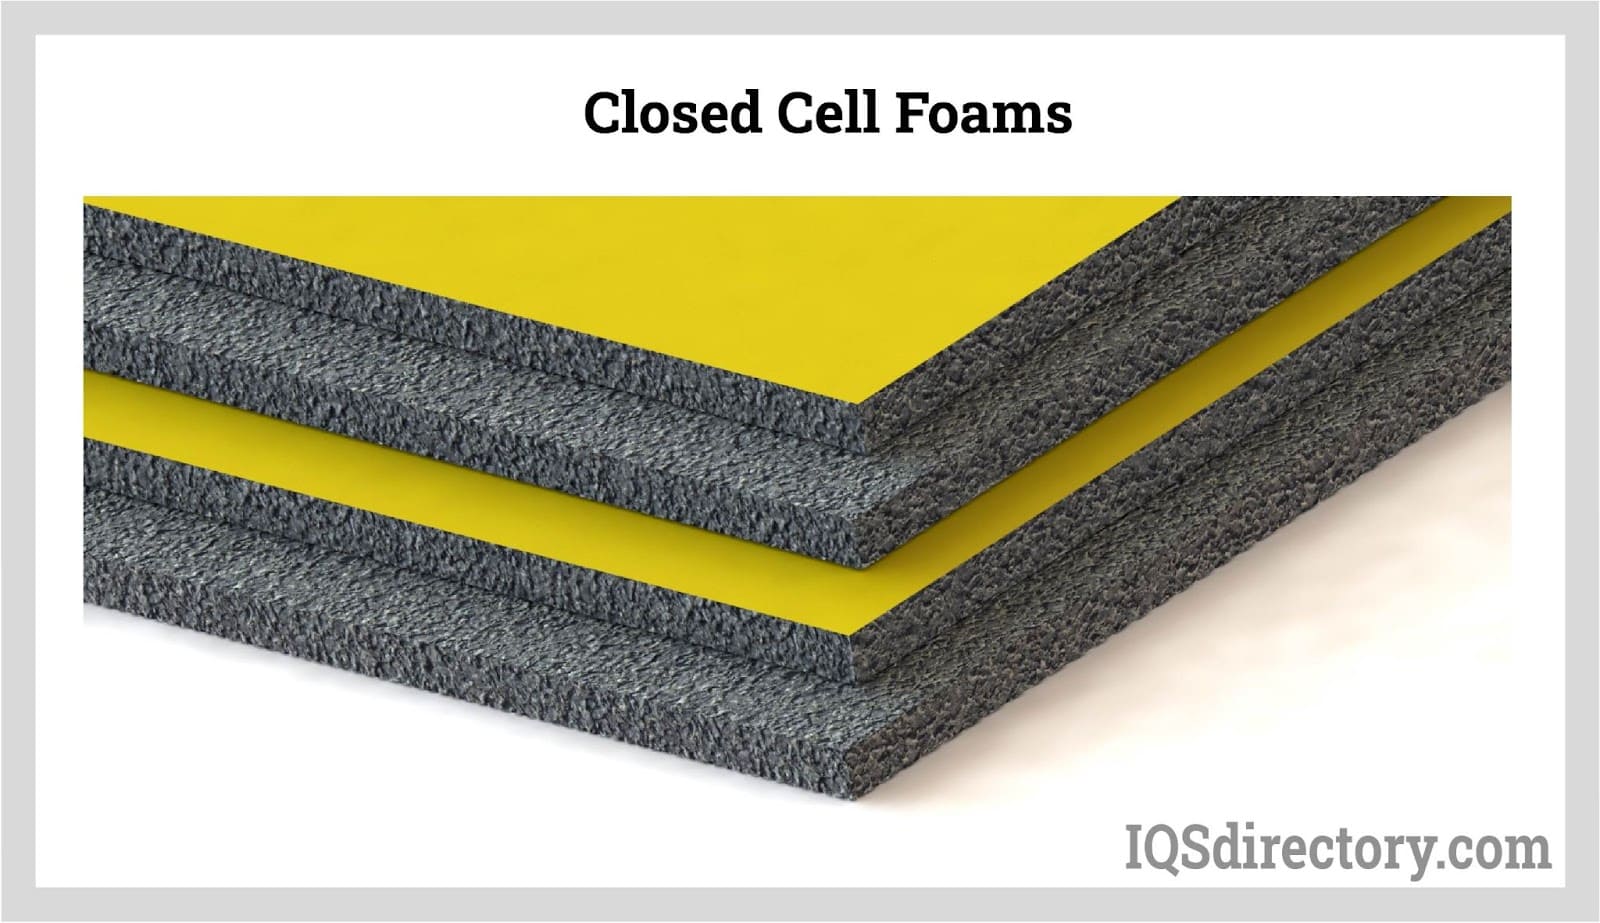 Closed Cell Foam: Types, Applications, Benefits, and Manufacturing